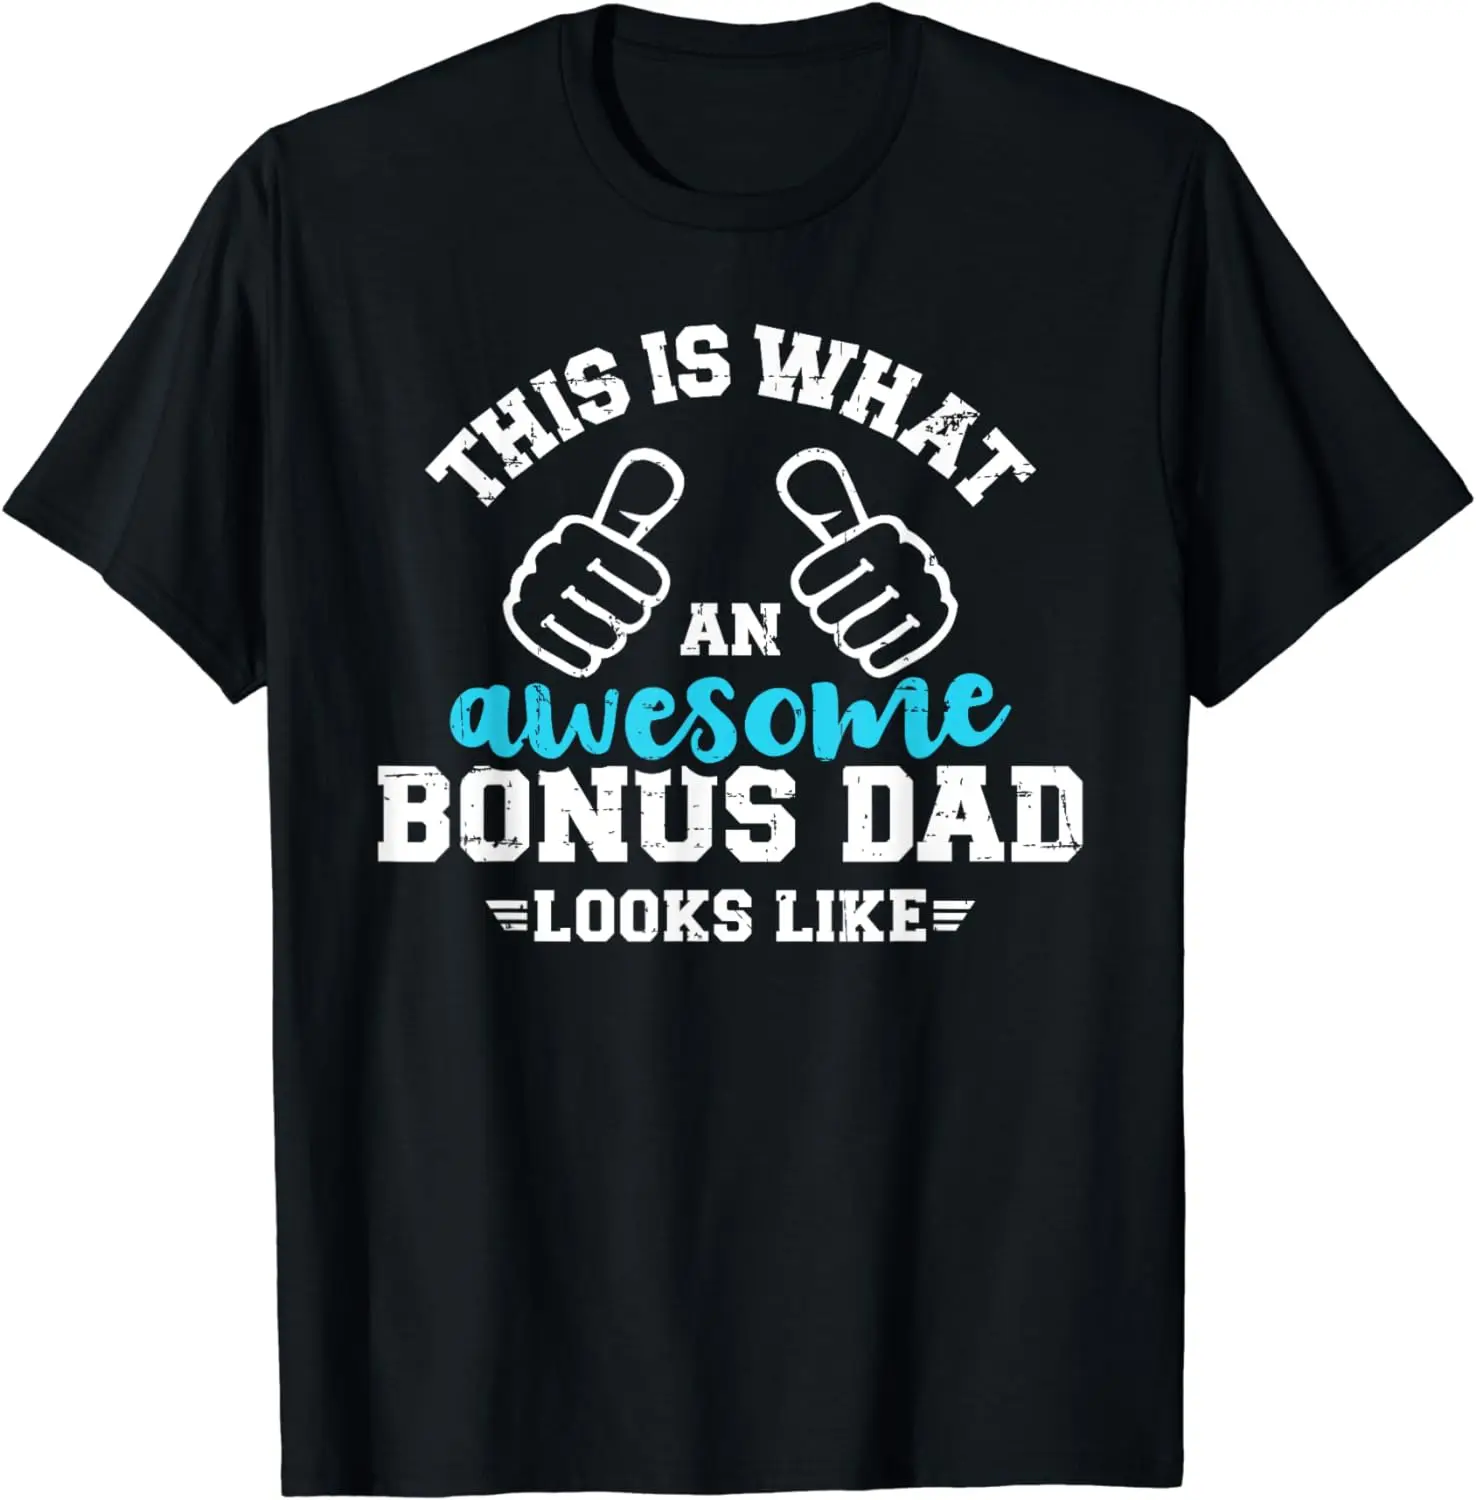 

This is what an awesome bonus dad looks like T-Shirt